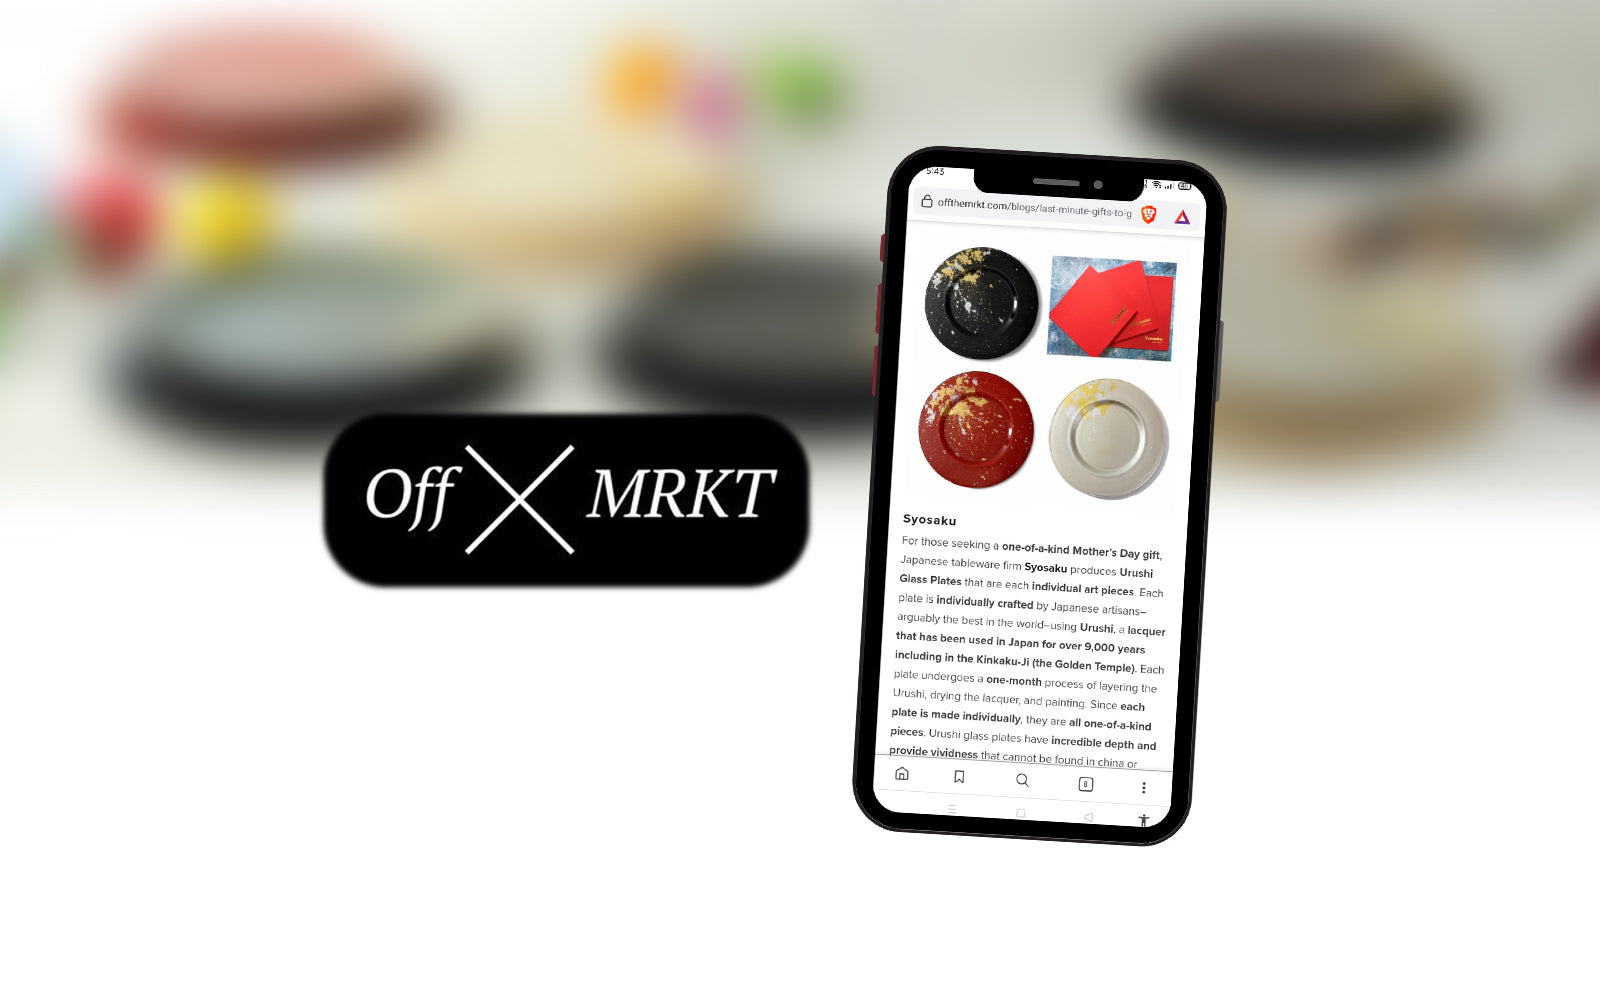 Syosaku-Japan was Featured in Off the Mrkt